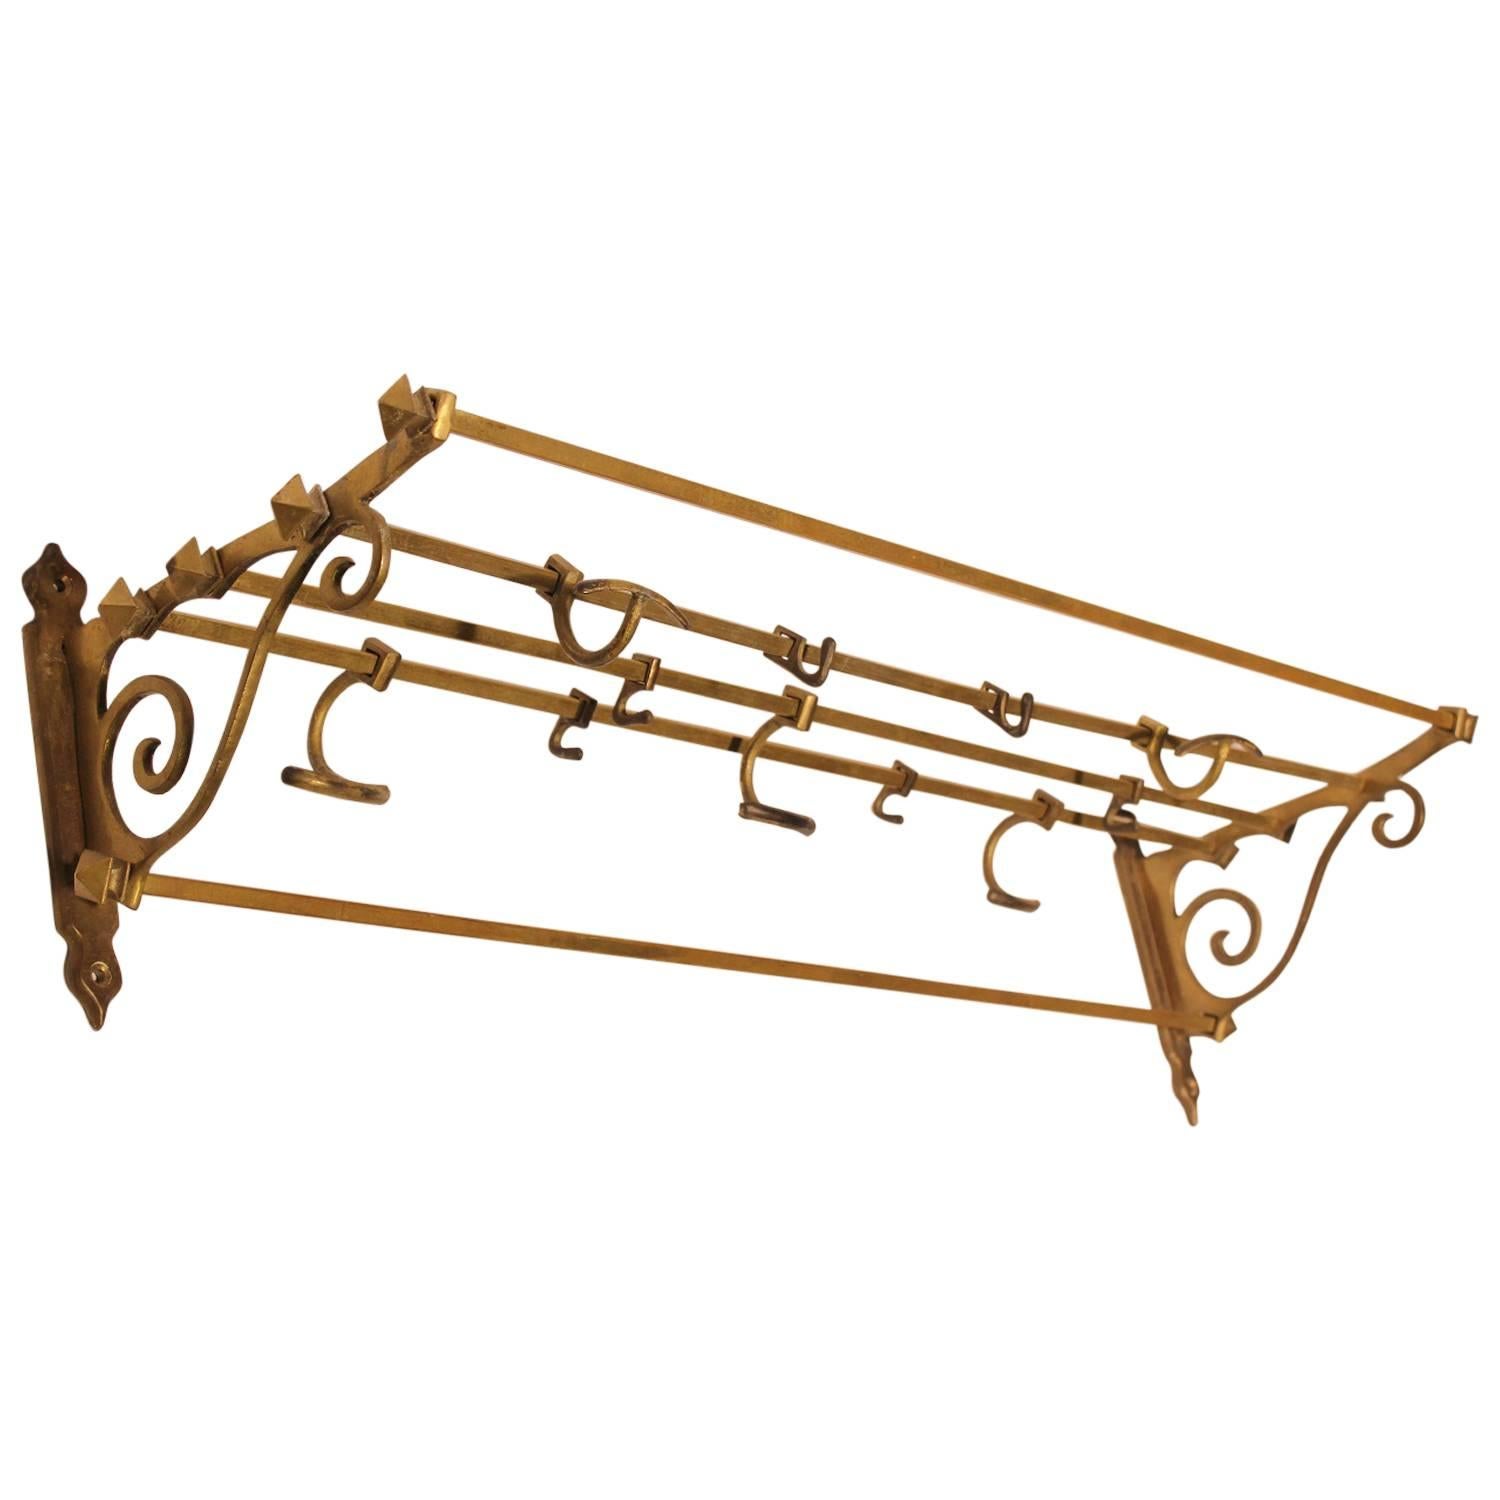 Antique Coat and Hat Brass Wall Rack